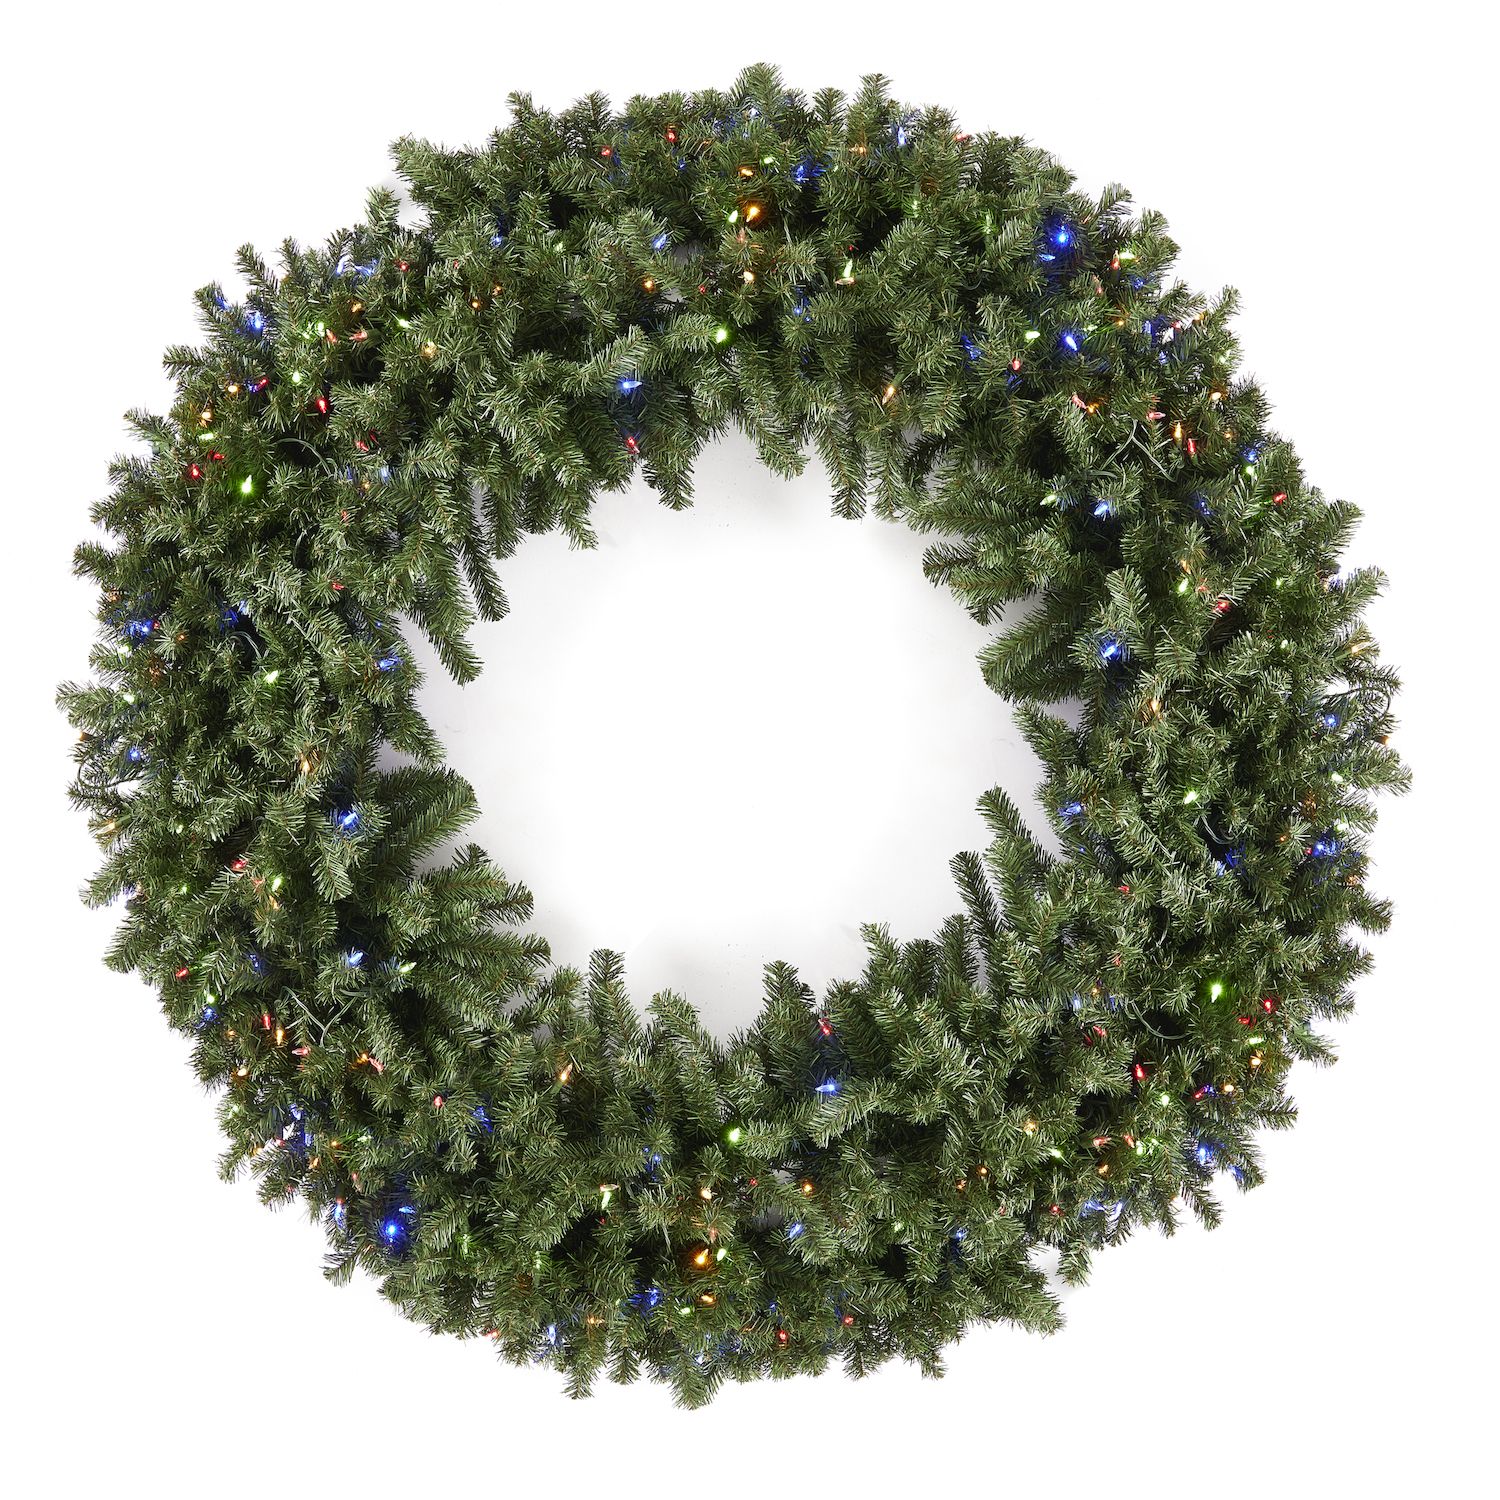 Image for Home Heritage 60" Pre-lit Holiday Christmas Wreath with 300 Color Changing LEDs at Kohl's.